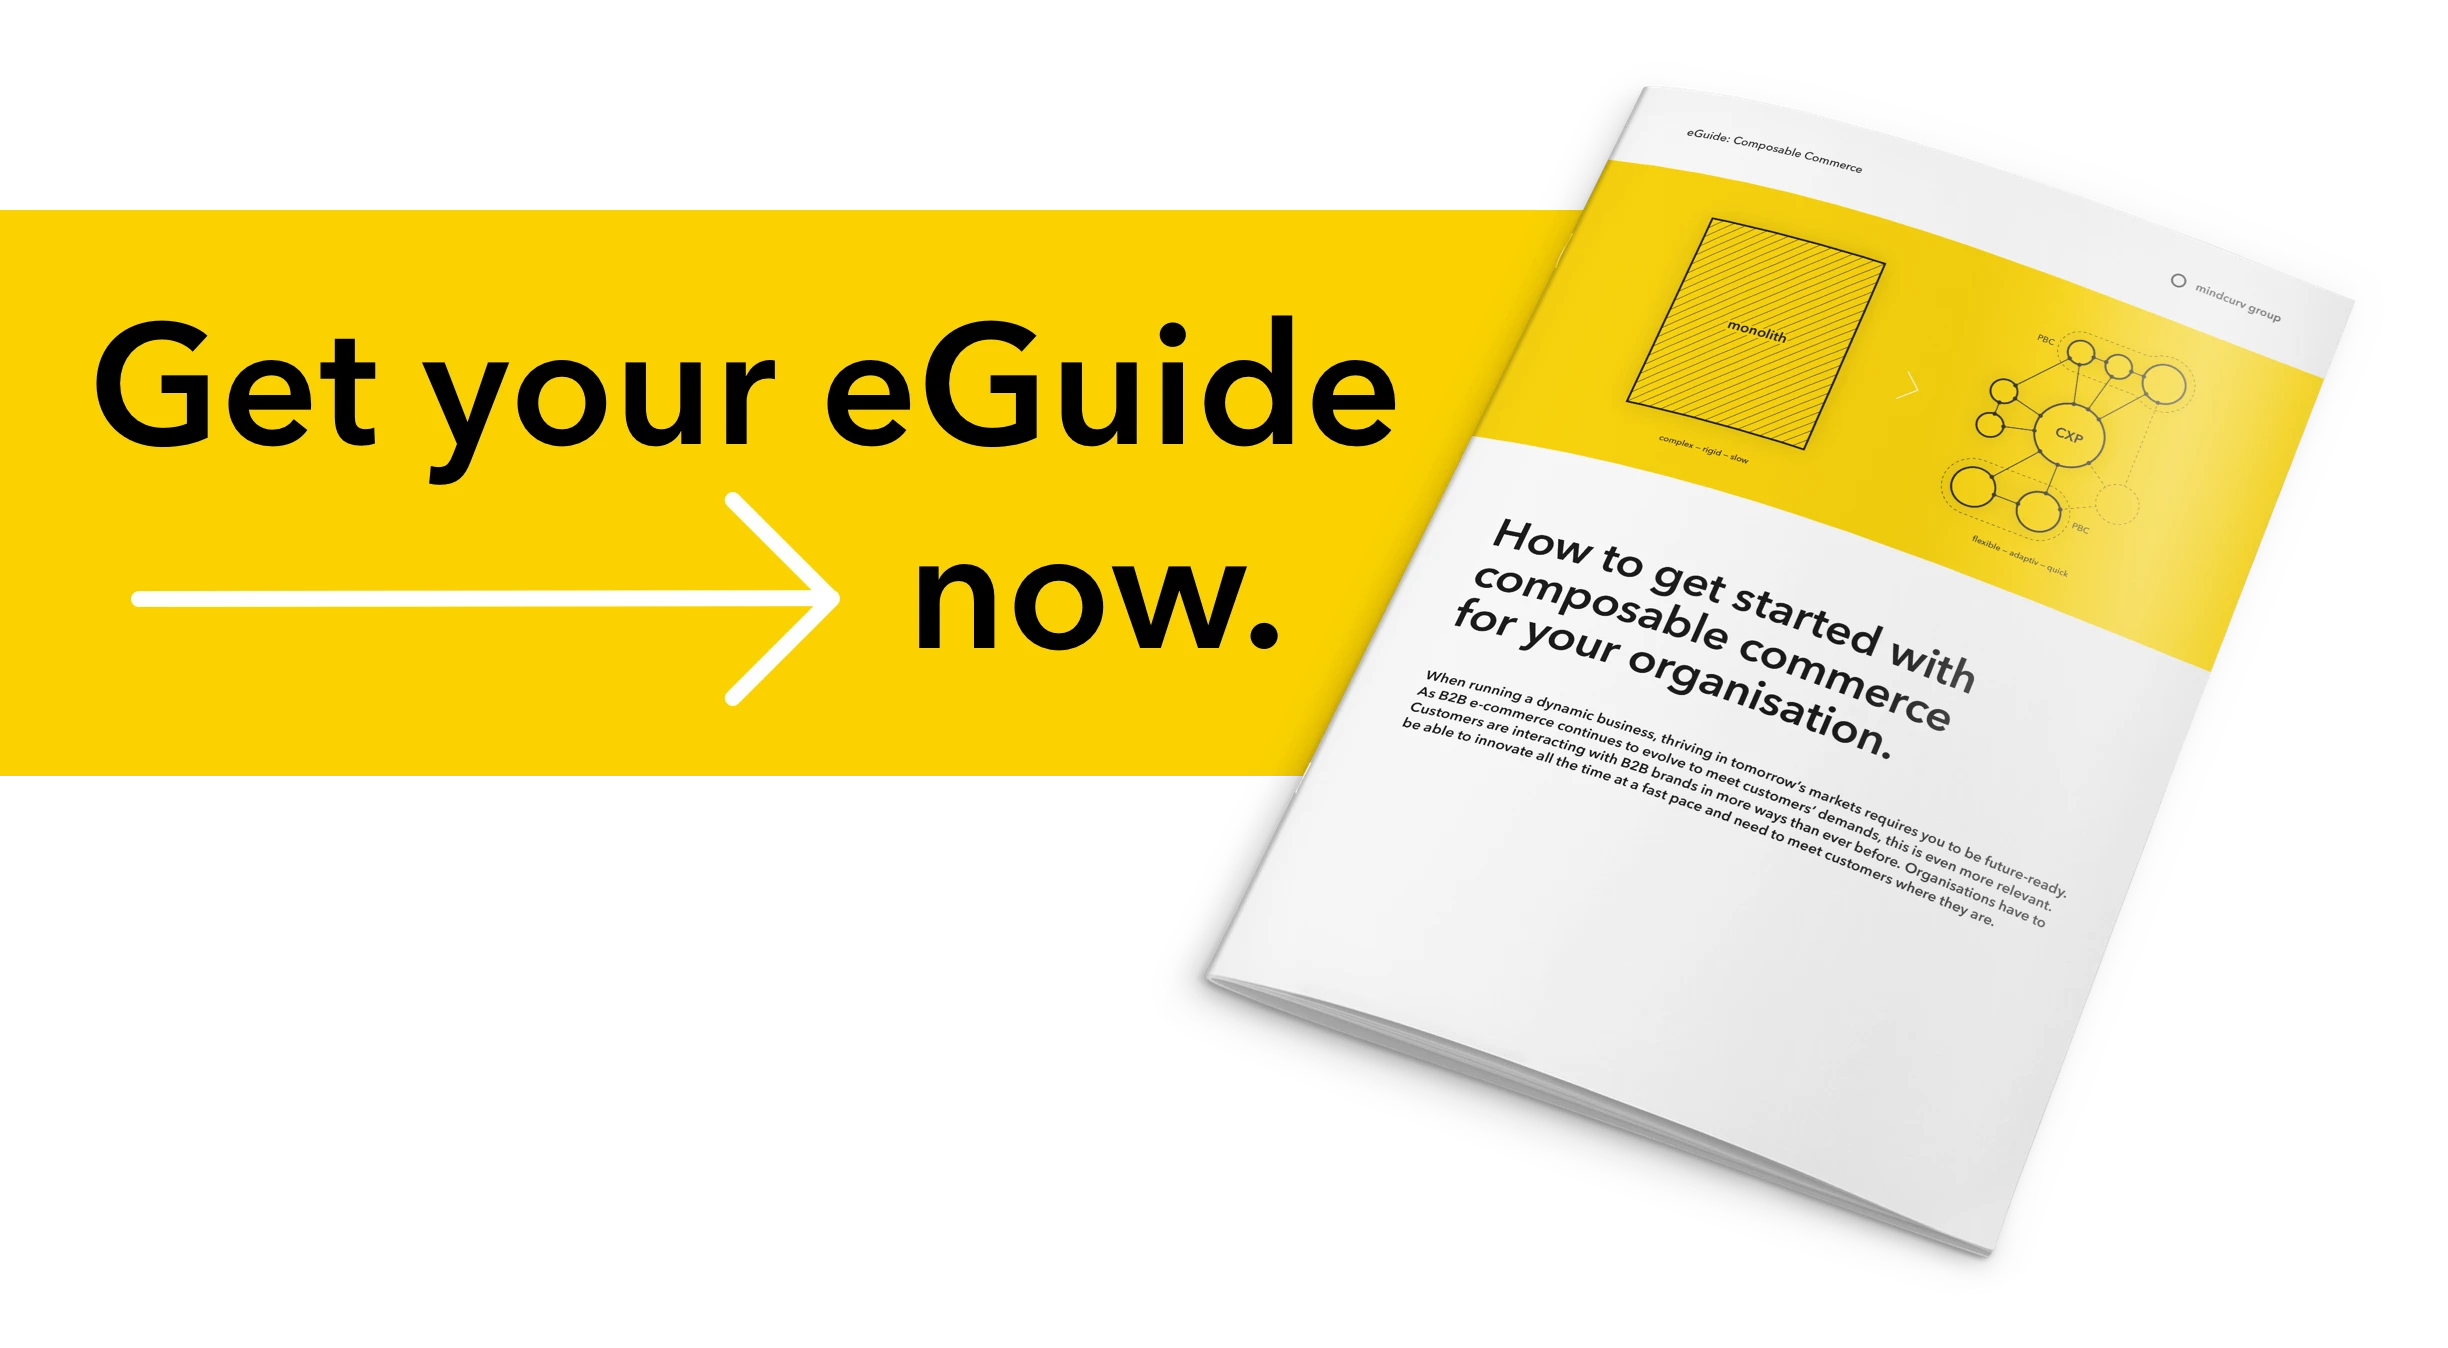 Get your eGuide now.